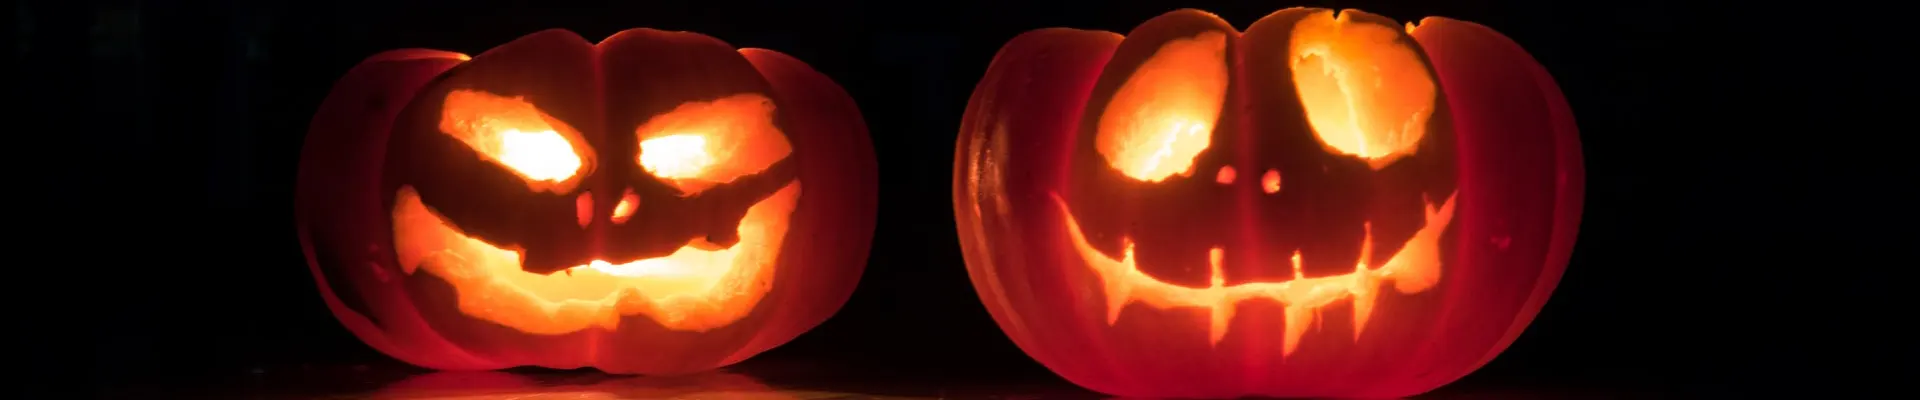 Halloween Songs for Your For All Hallows' Eve Party Playlist.